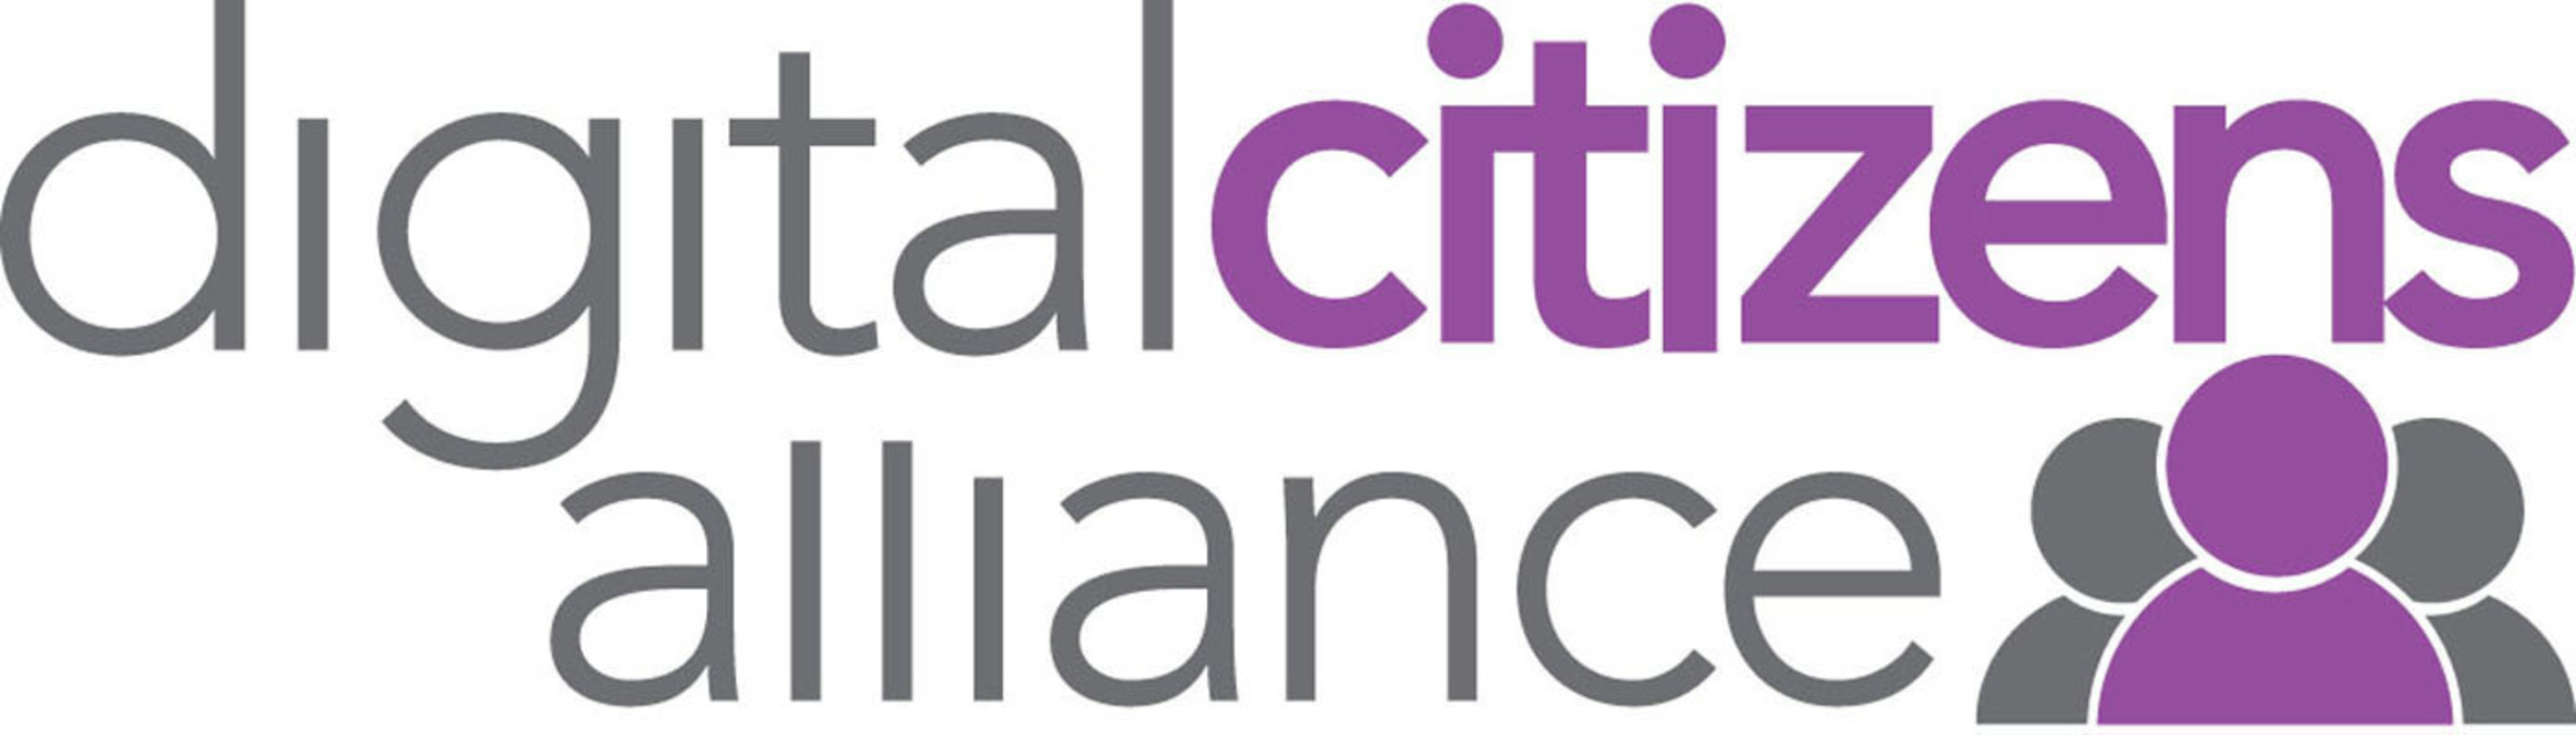 Logo for the Digital Citizens Alliance. Digital Citizens is a consumer-oriented coalition focused on educating the public and policy makers on the threats that consumers face on the Internet and the importance for Internet stakeholders - individuals, government and industry - to make the Web a safer place. (PRNewsFoto/Digital Citizens Alliance) (PRNewsFoto/DIGITAL CITIZENS ALLIANCE)